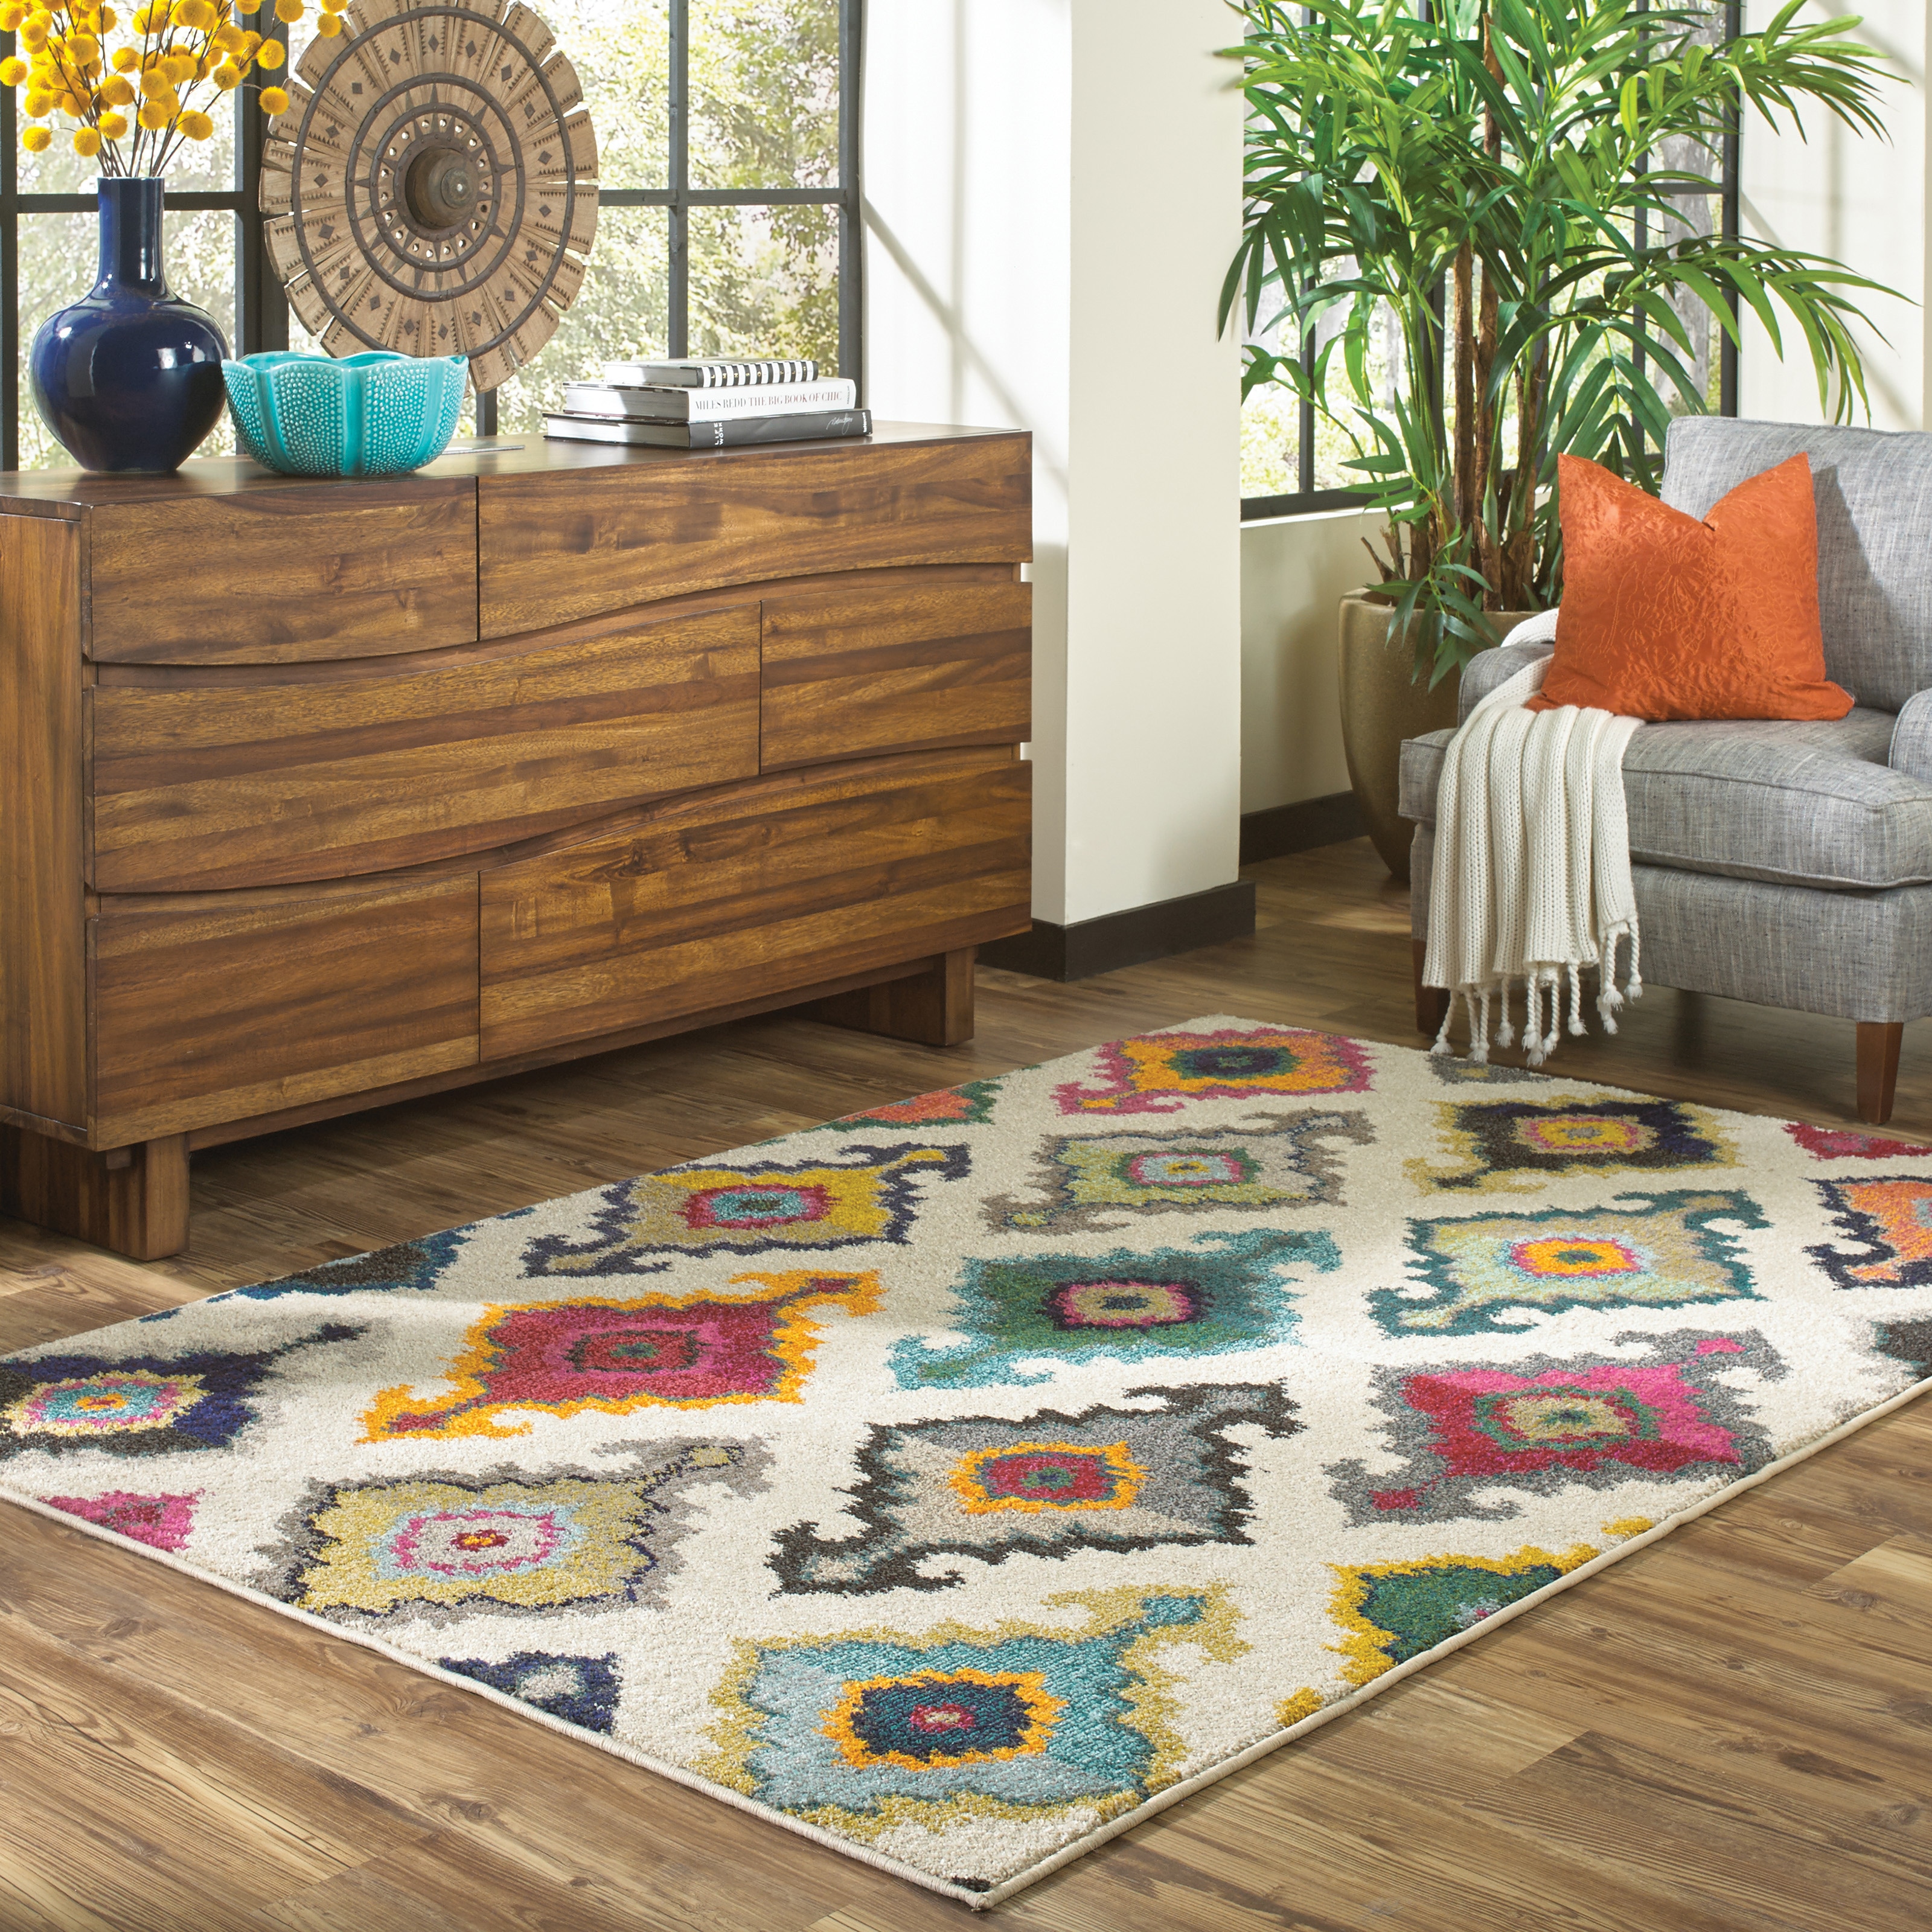 Vibrant Bohemian Ivory And Multicolored Area Rug (4 X 59)